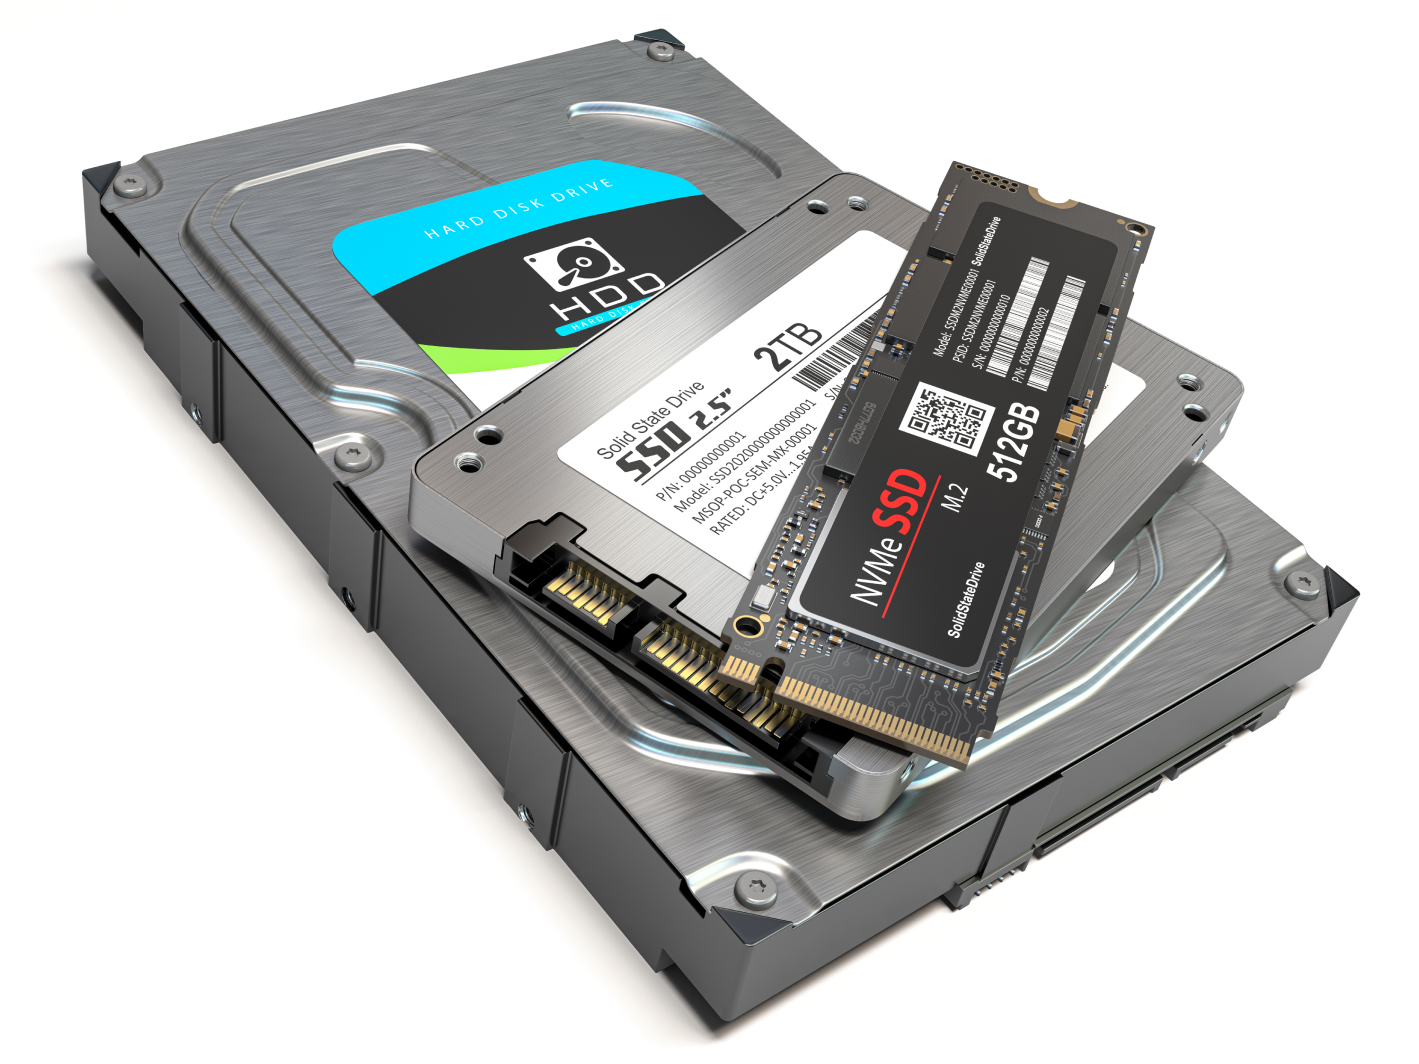 https://www.datocms-assets.com/34299/1663155864-hard-disk-drive-hdd-solid-state-drive-ssd-and-ssd-2021-08-29-21-04-56-utc-1.jpg